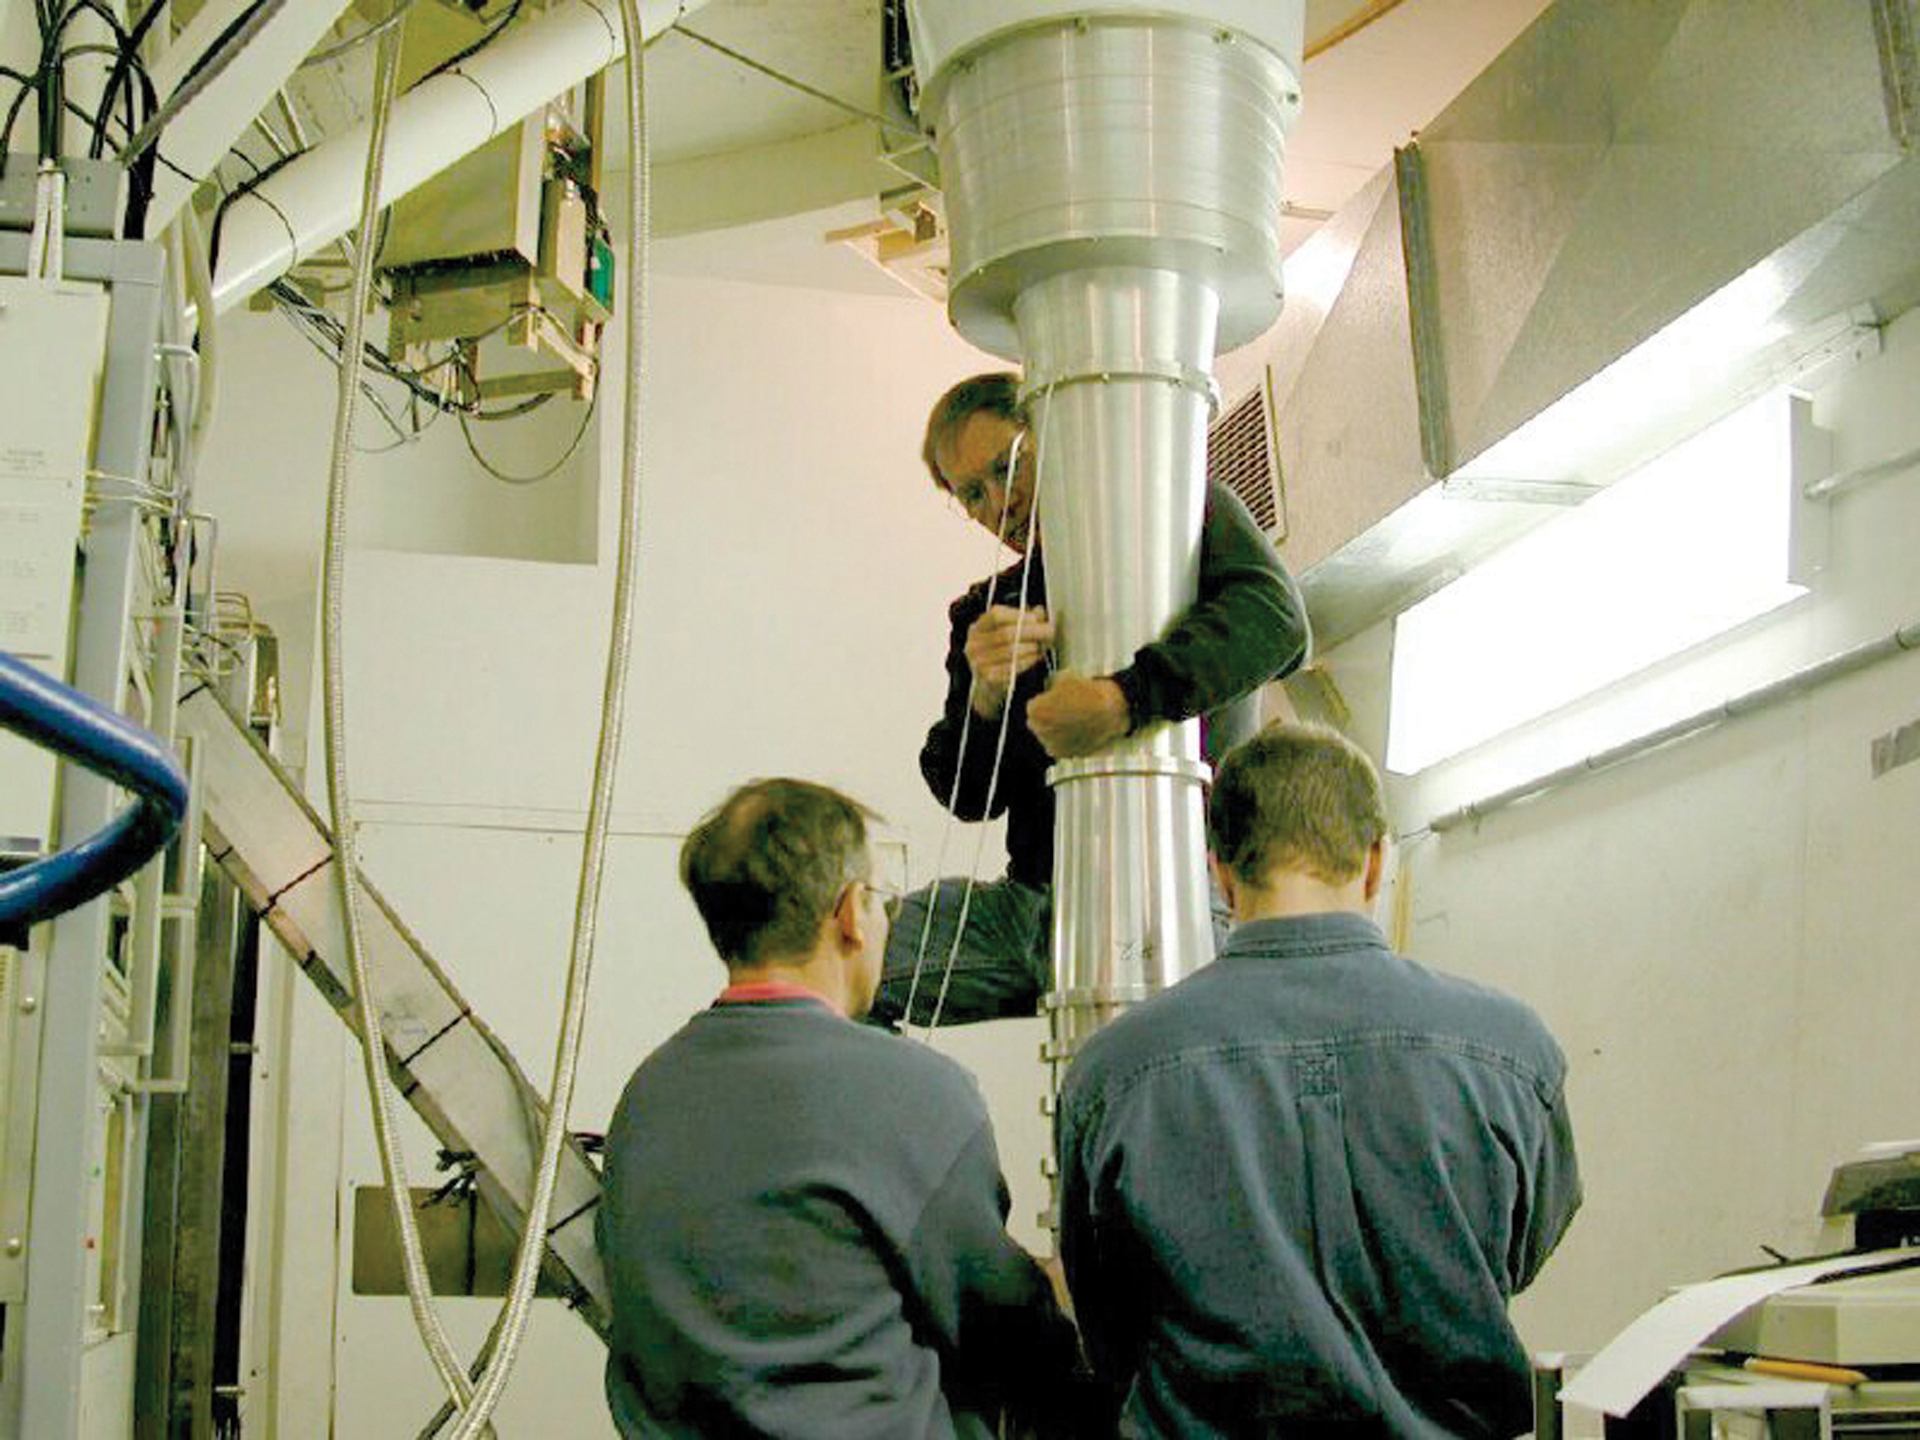 Installing a Receiver on the GBT, March 2004